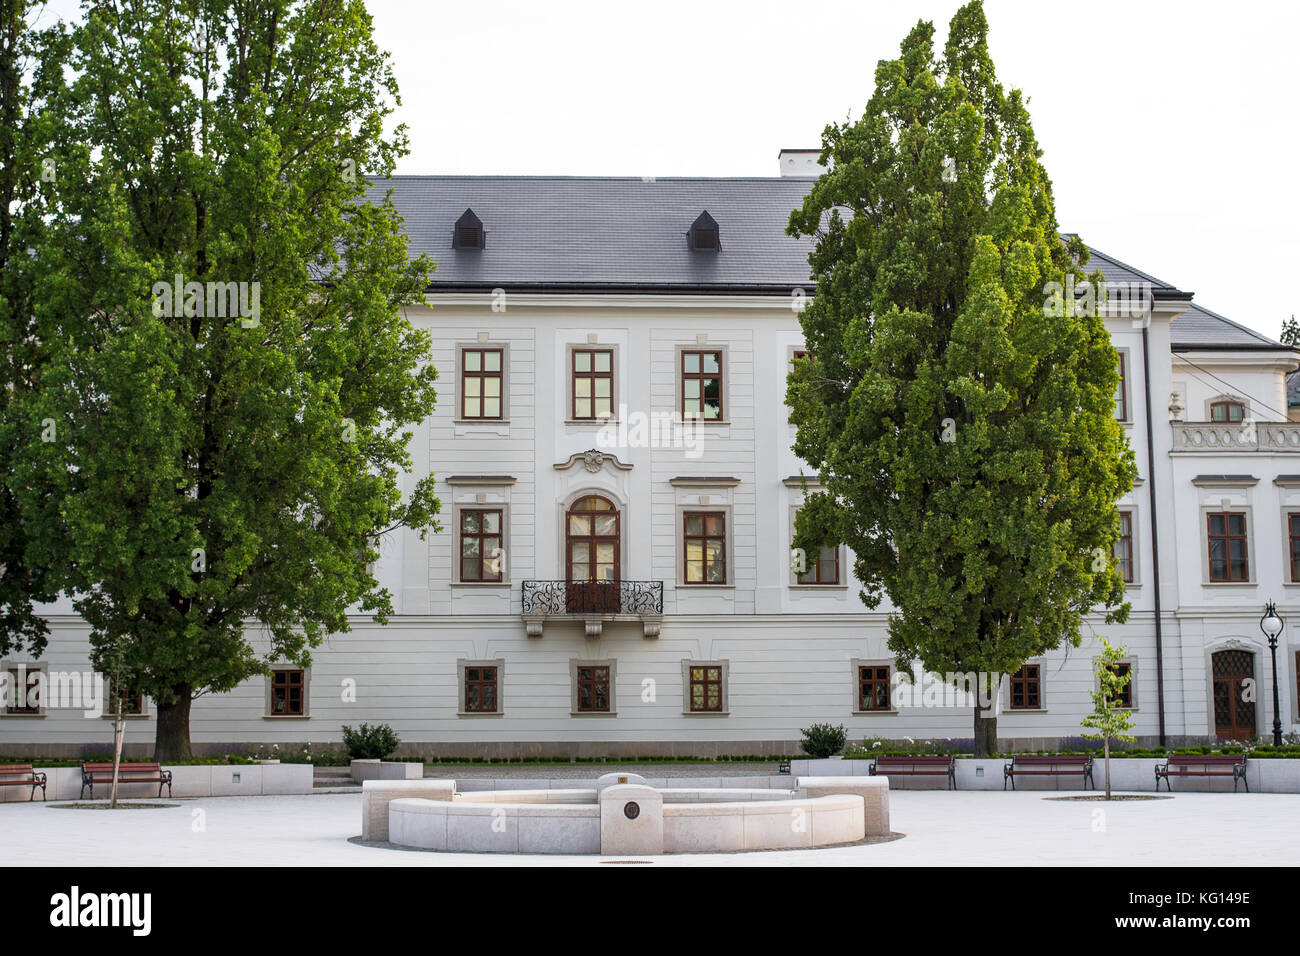 Archbishop's Palace in Eger, Hungary Stock Photo